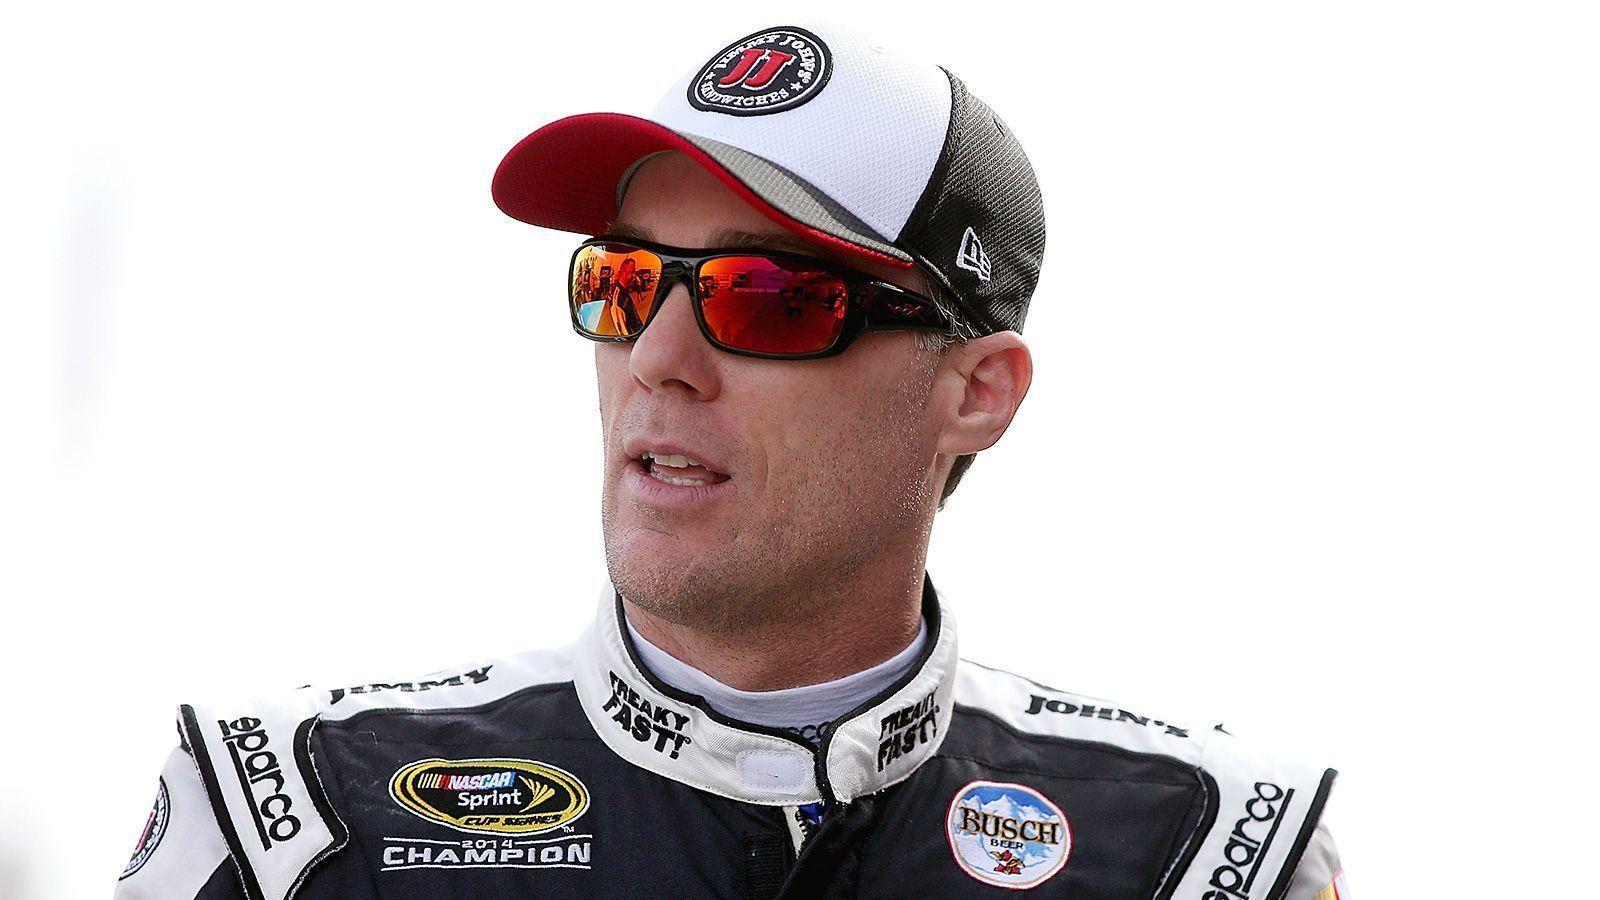 Why It&;s So Critical For The Stewart Haas Racing Drivers To Win